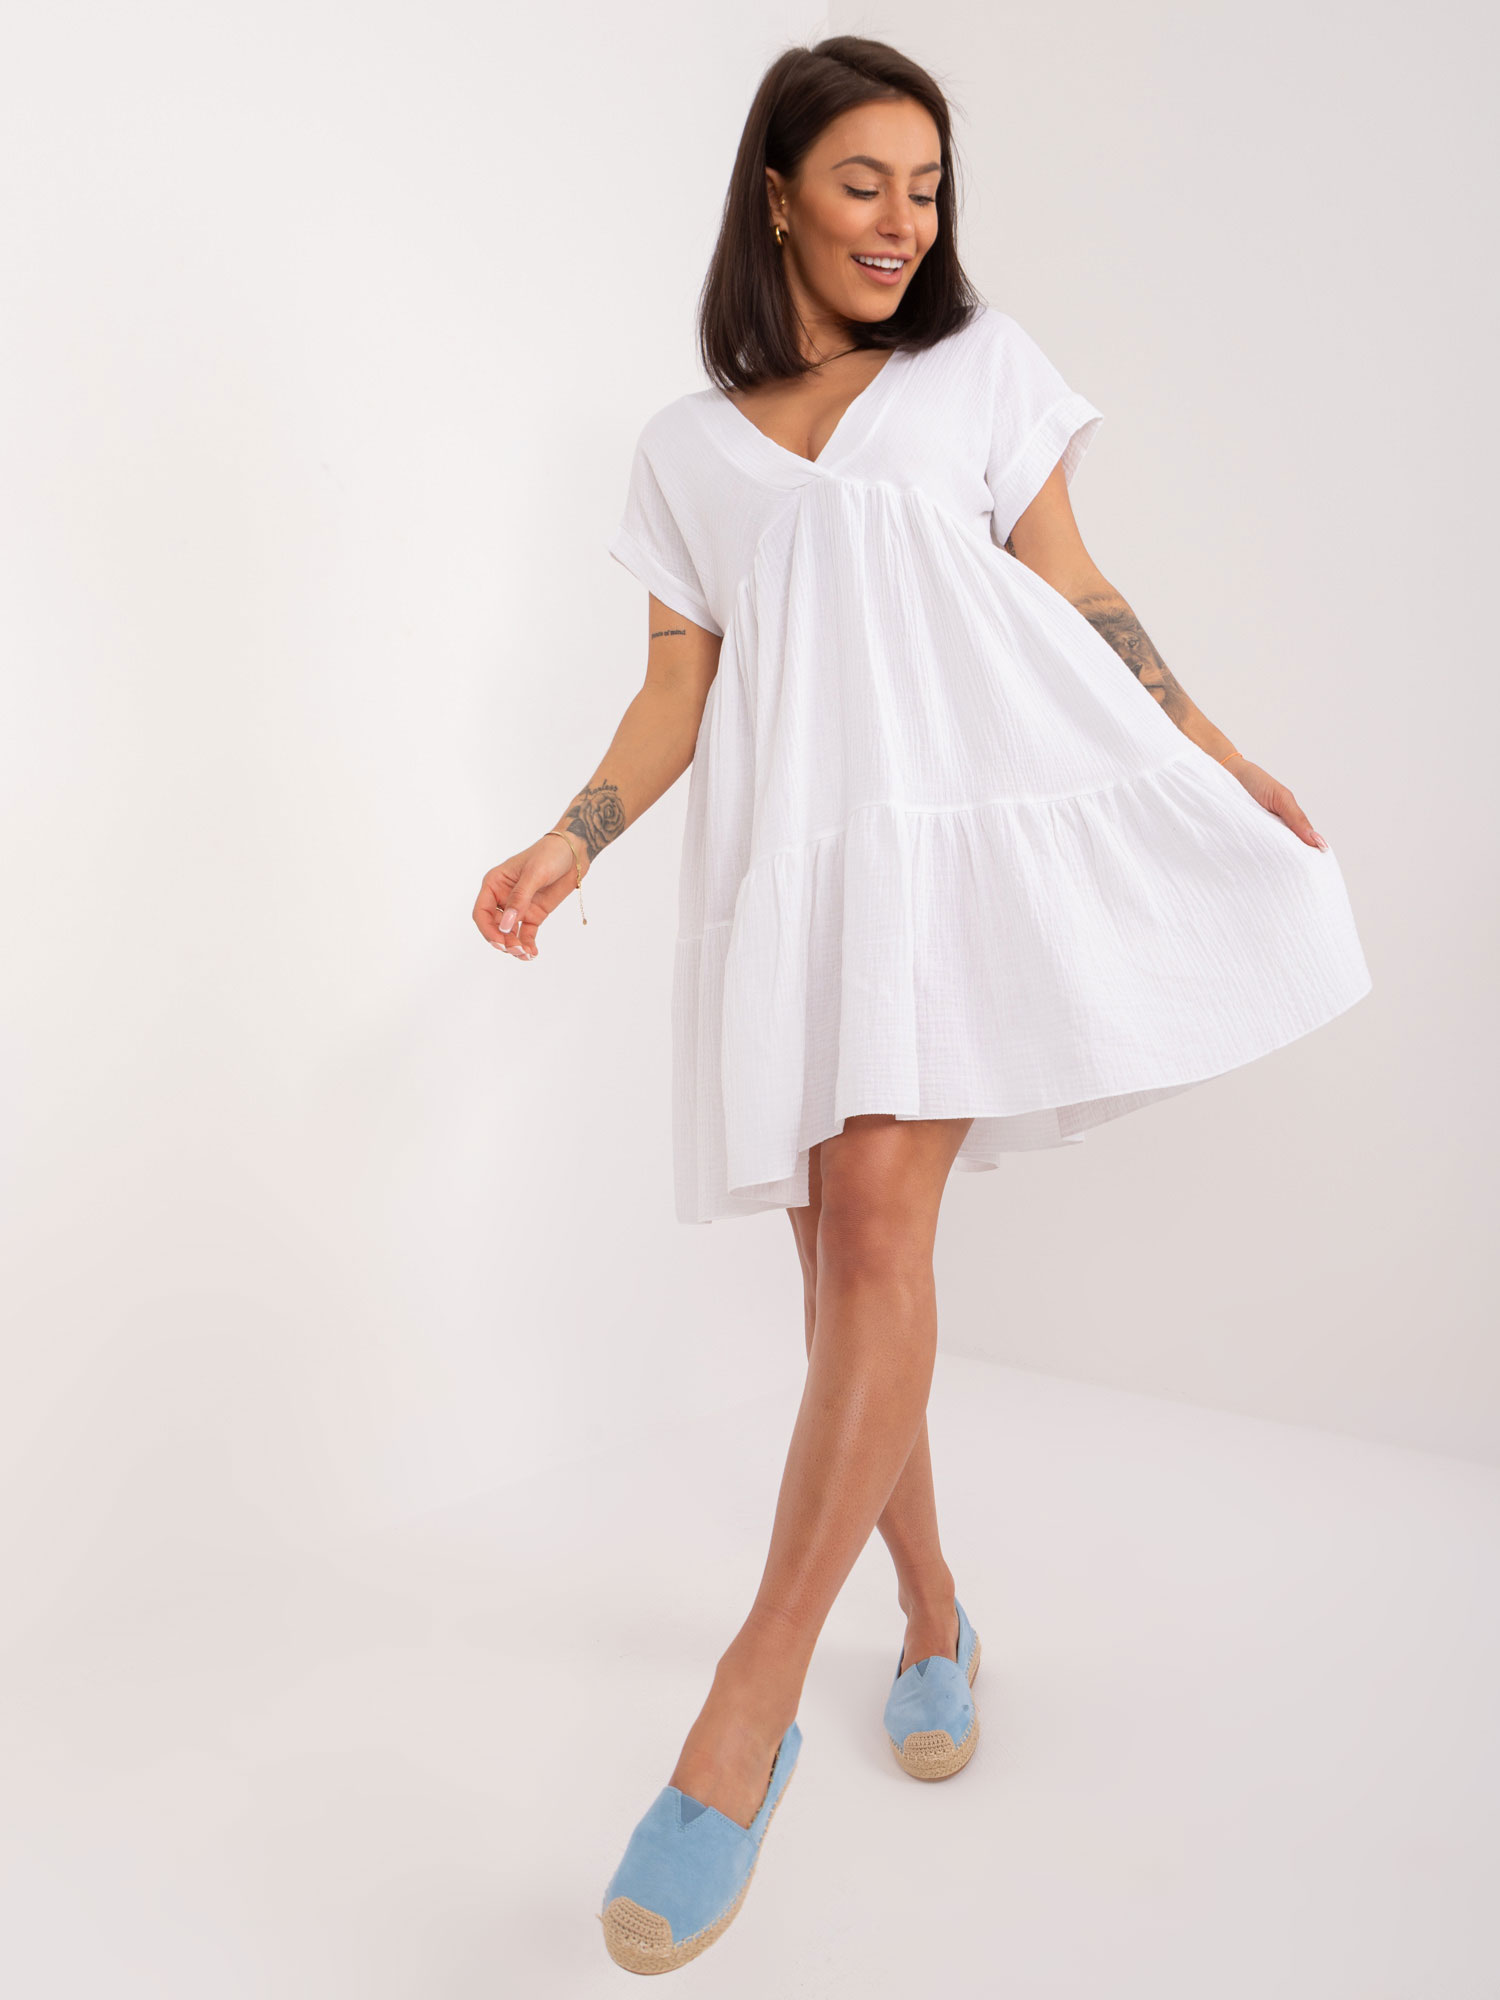 White casual dress with ruffles